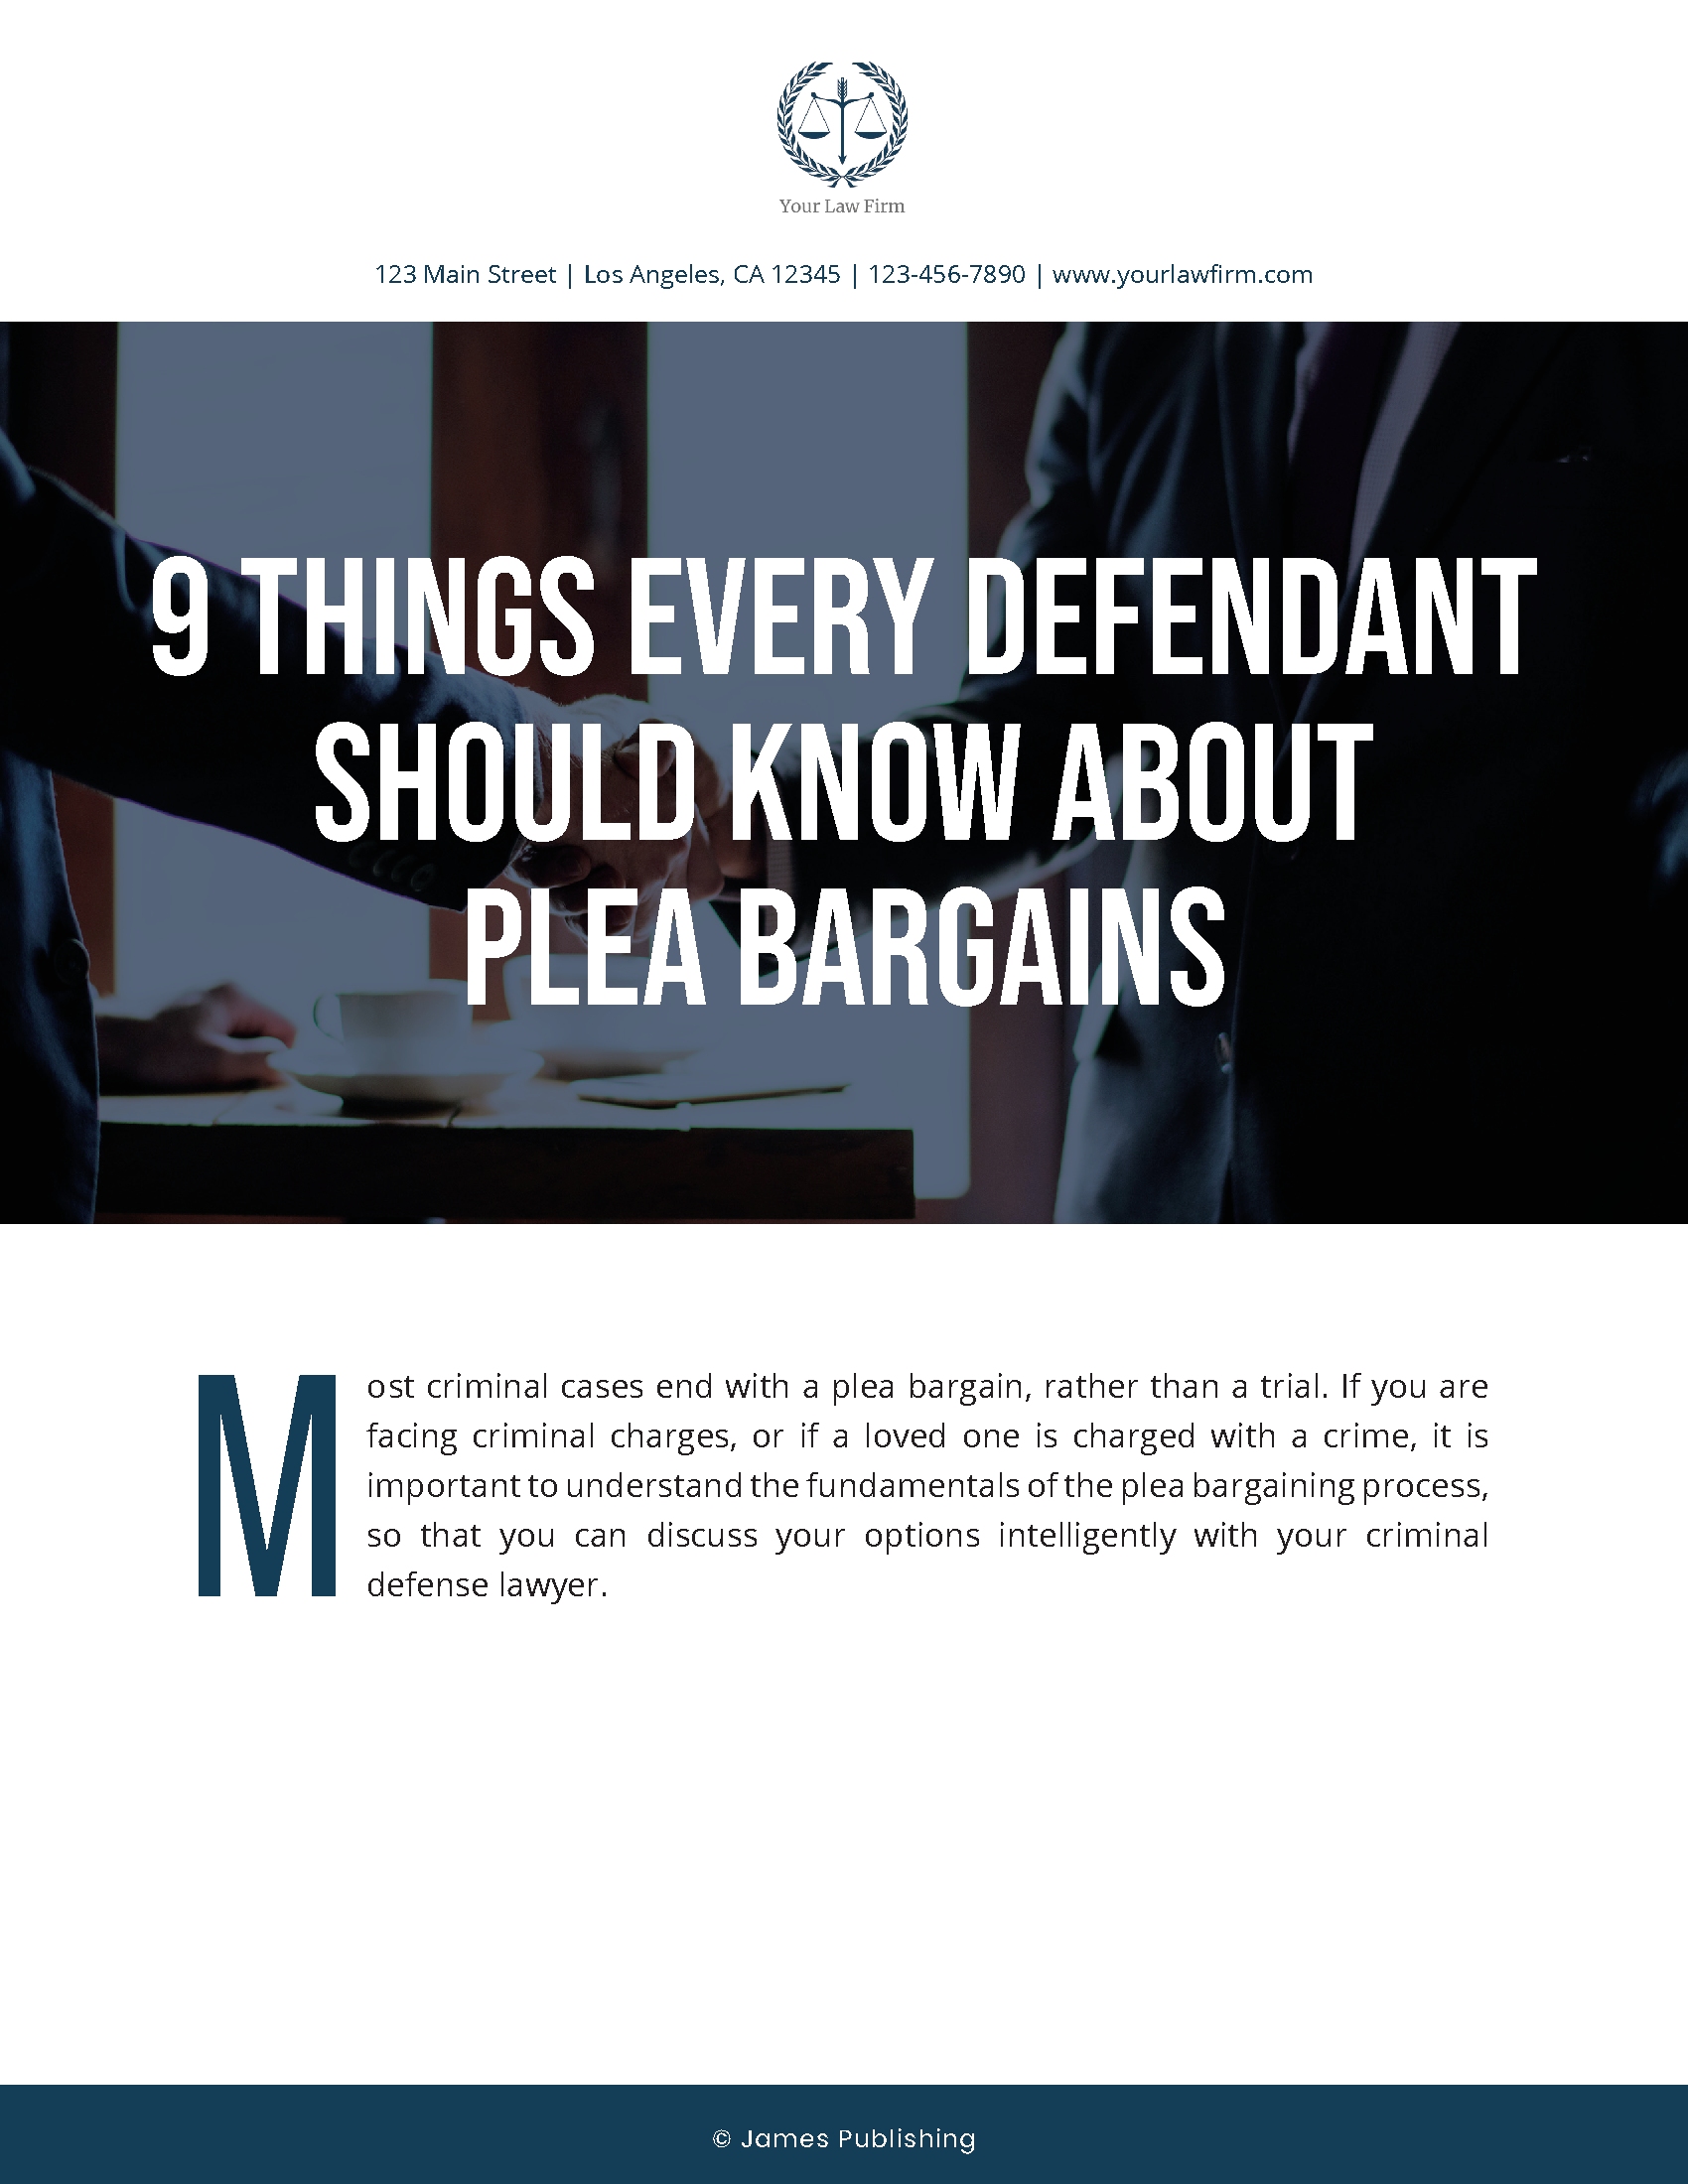 CRIM-26 9 Things Every Defendant Should Know About Plea Bargains